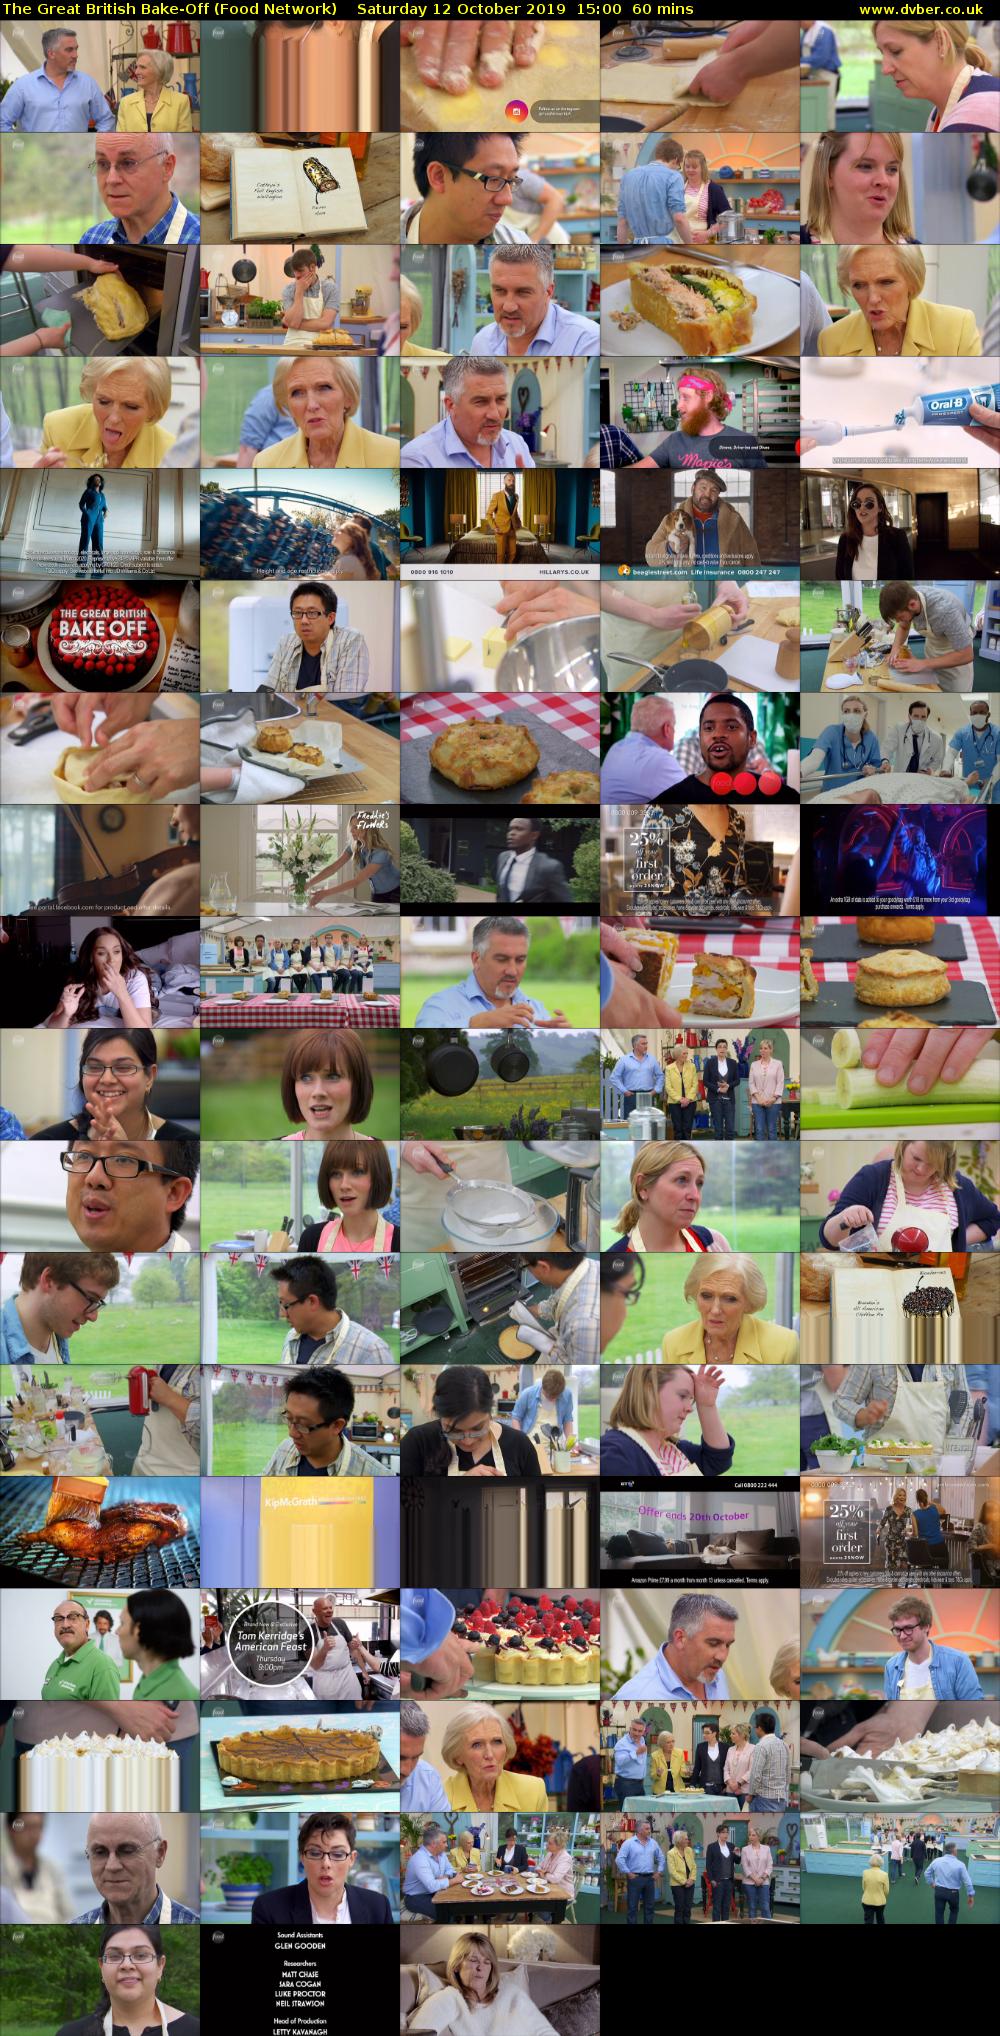 The Great British Bake-Off (Food Network) Saturday 12 October 2019 15:00 - 16:00